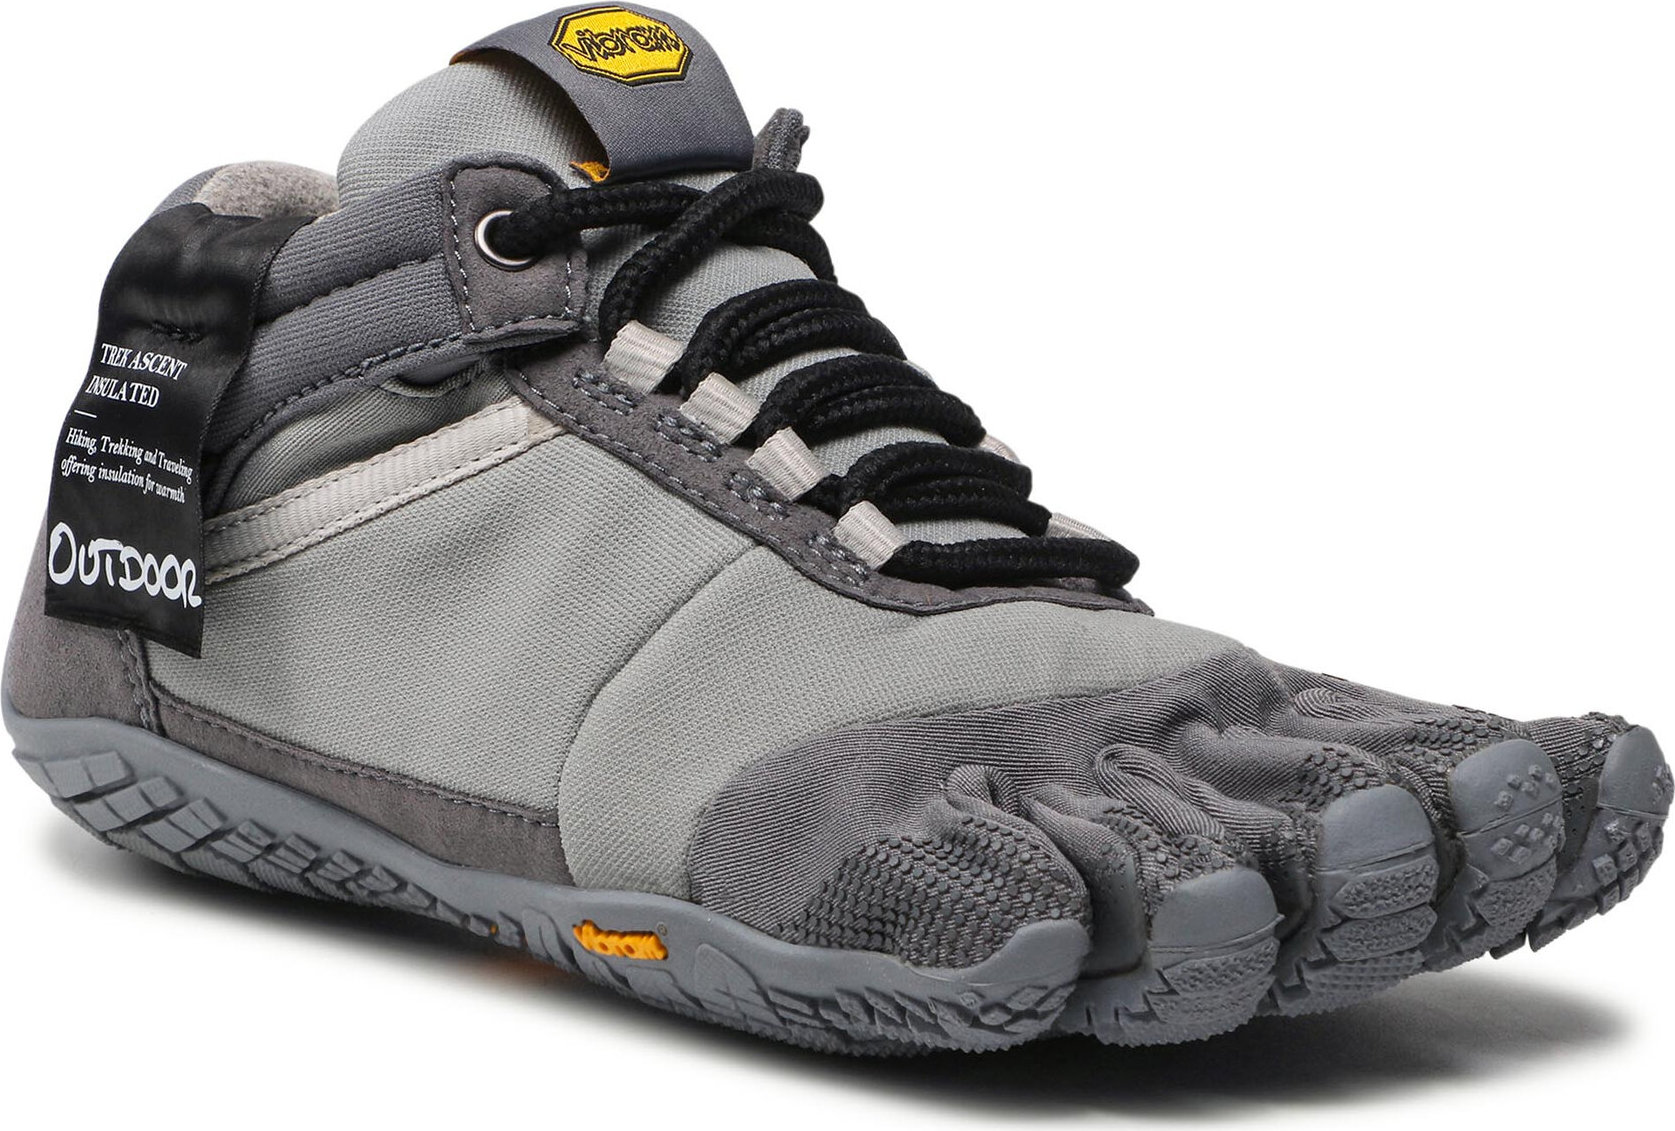 Topánky Vibram Fivefingers Trek Ascent Insulated 18W5301 Grey